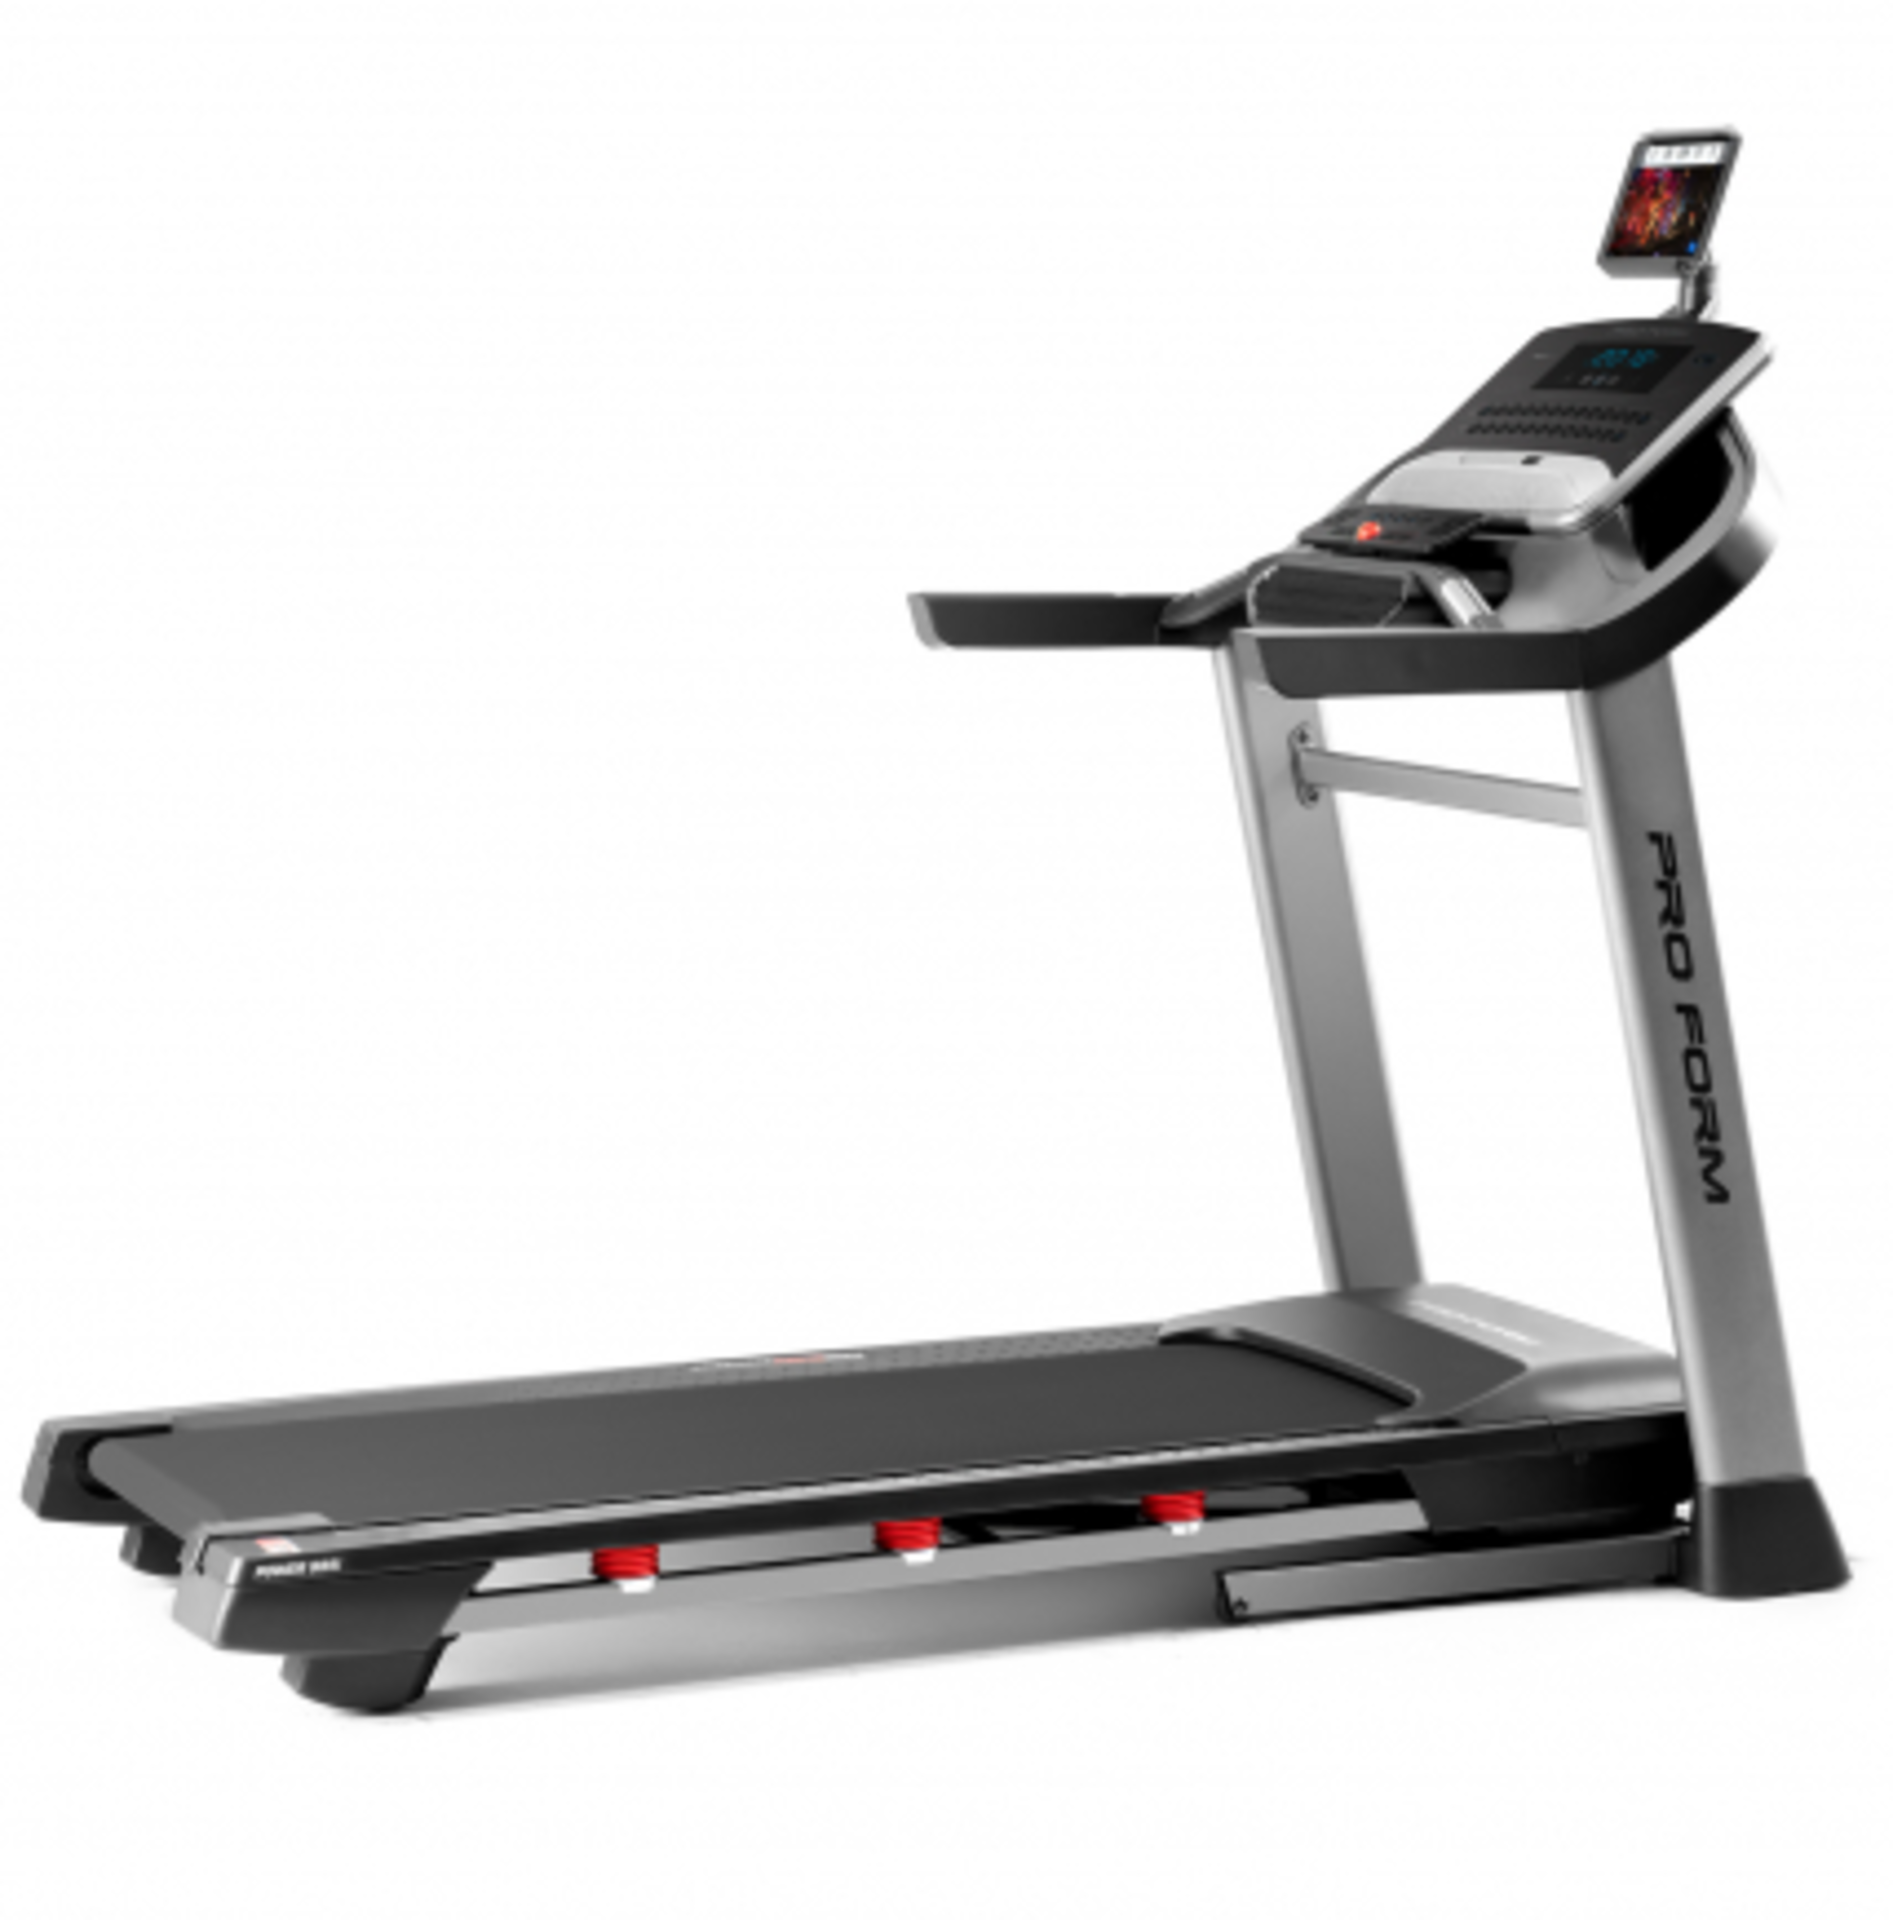 Pro-Form - MACHZ 1 Power 995i Folding Treadmill - Untested, Assembled - No Packaging - Viewing